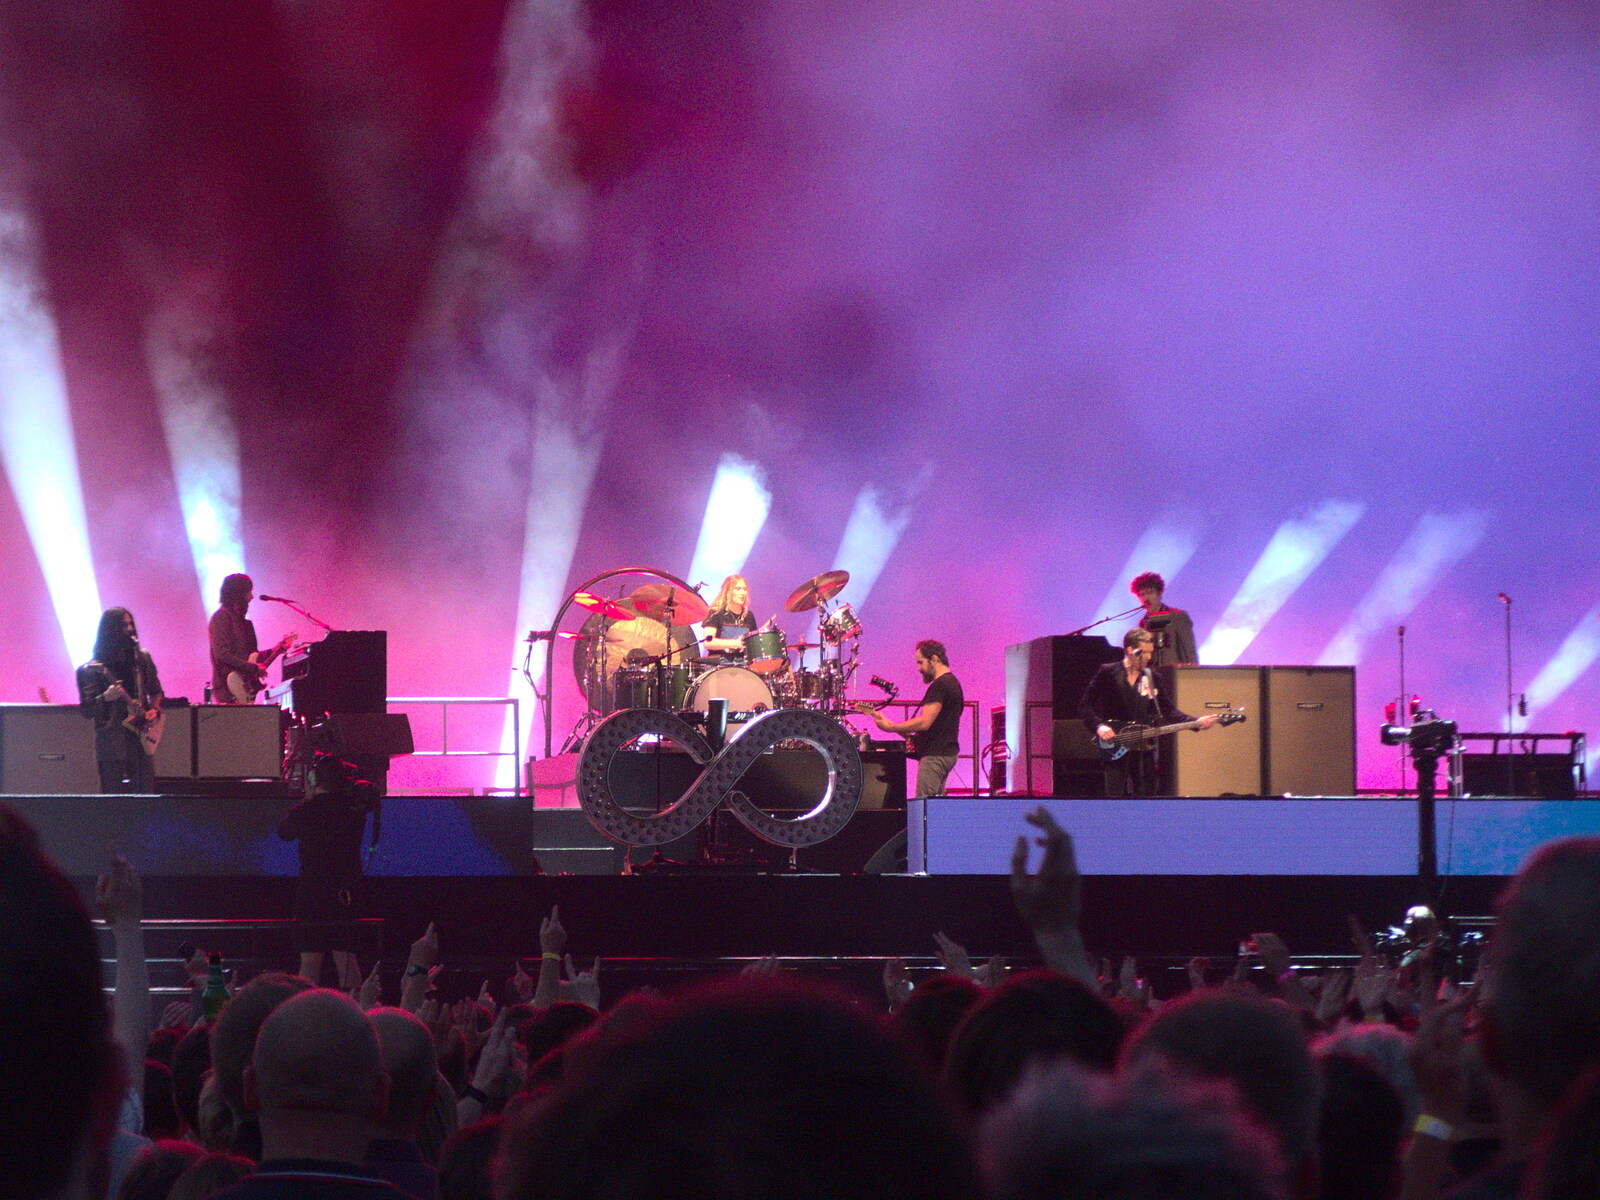 The Killers at Carrow Road, Norwich, Norfolk - 9th June 2022: More impressive dumming from student Grace